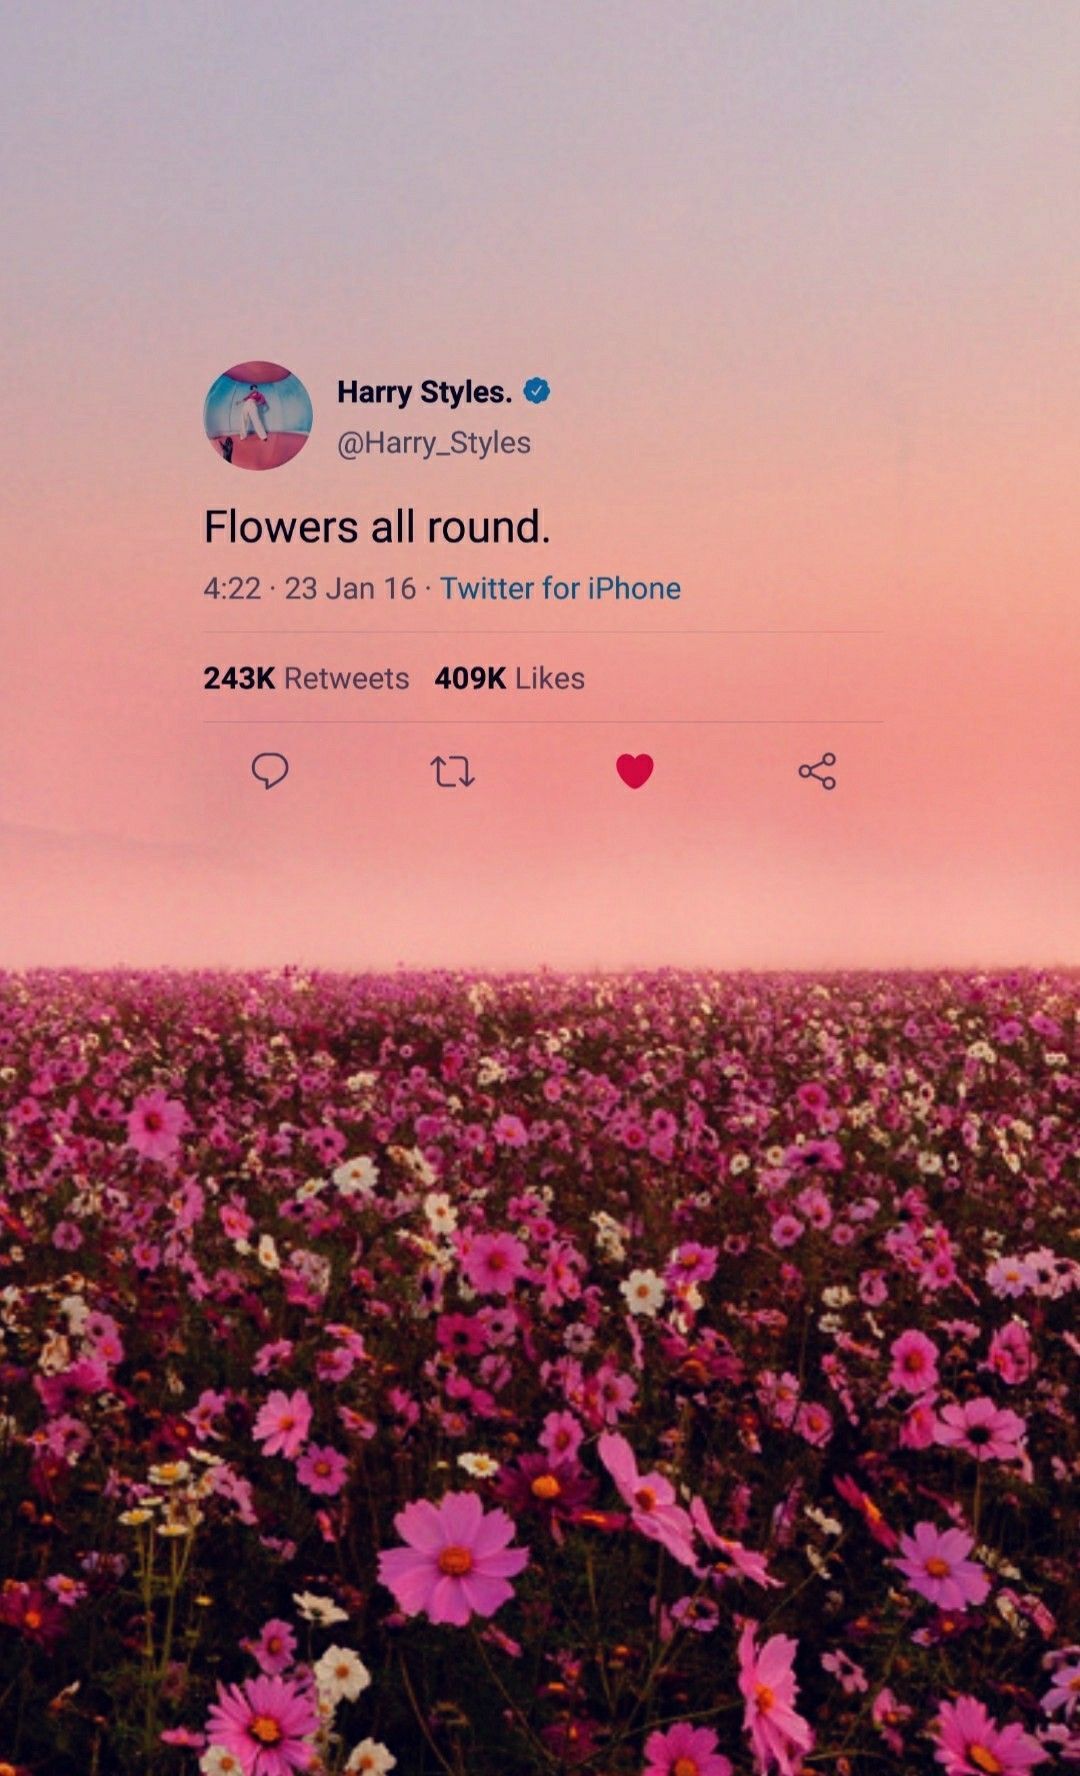 Flowers all round Styles tweet wallpaper. Harry styles wallpaper, Harry styles tweets, Harry styles quotes